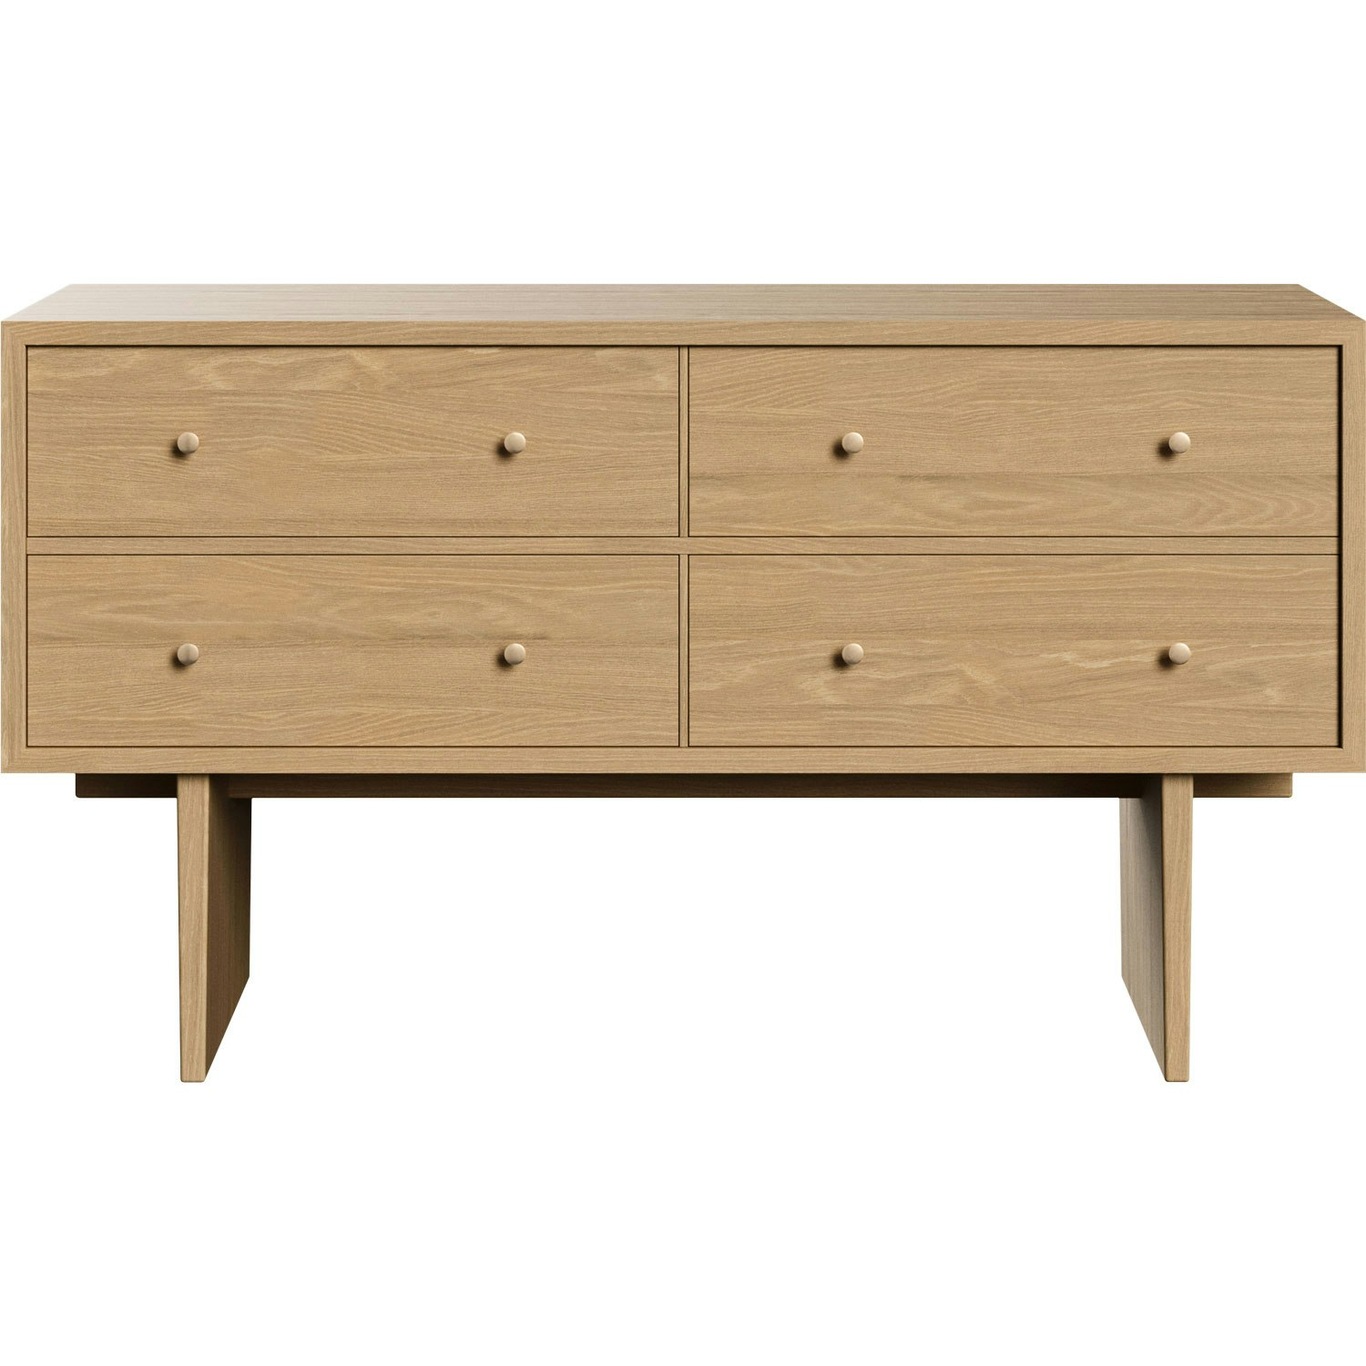 Private Sideboard 160x45x90 cm, Light Stained Oak